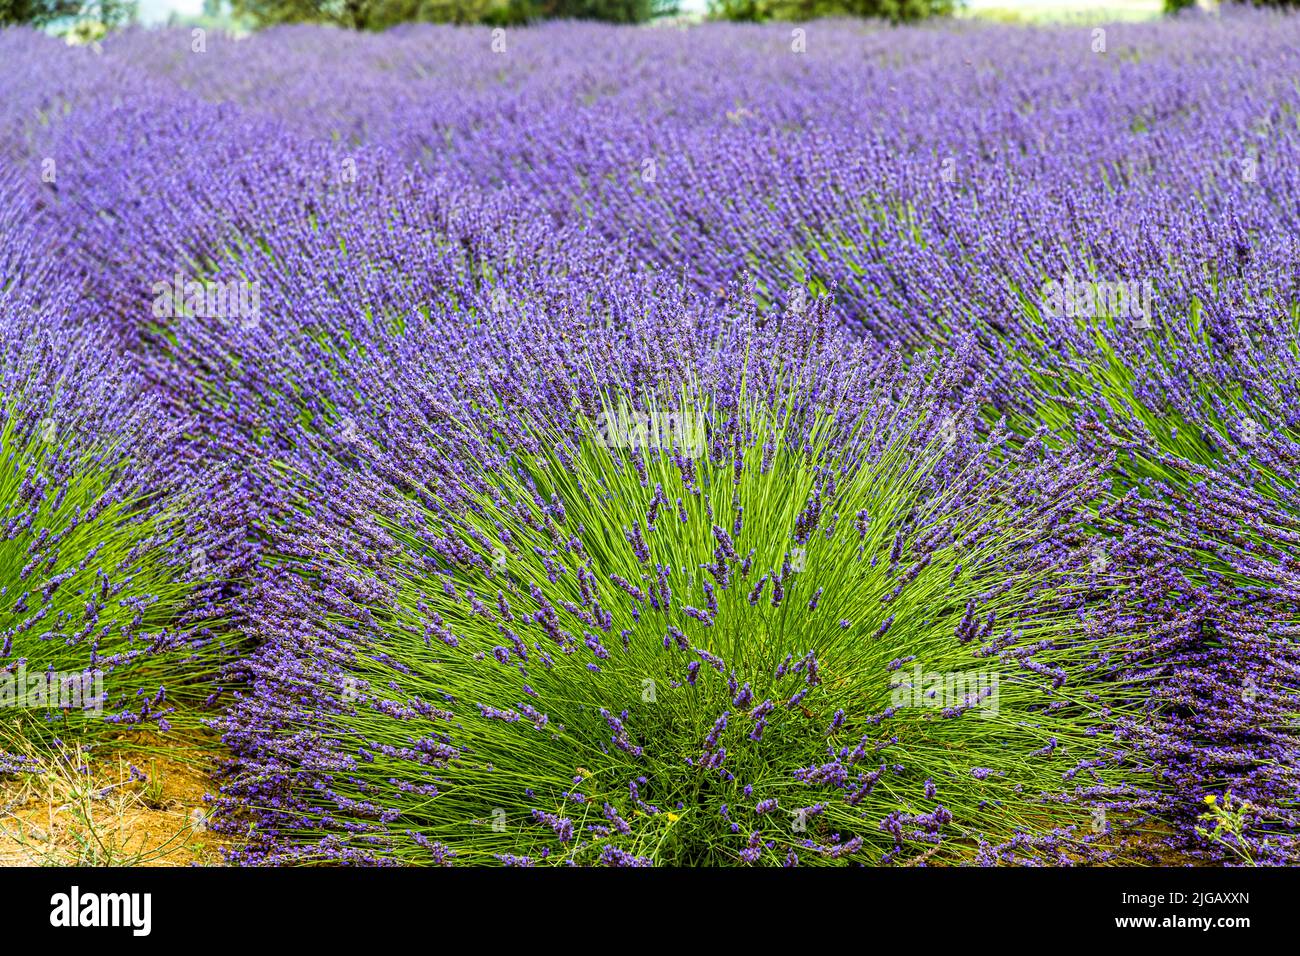 Lavandin usually forms larger and much more flowers. A decisive advantage for the industry is also the almost six times higher yield of essential oils that lavandin provides. In comparison, about 40 kg of lavandin flower panicles are sufficient to obtain the same amount of oil from about 150 kg of true lavender. While with real lavender you have to wait two to four years for the first harvest, oil extraction from lavandin fields can begin in the very first year. Stock Photo